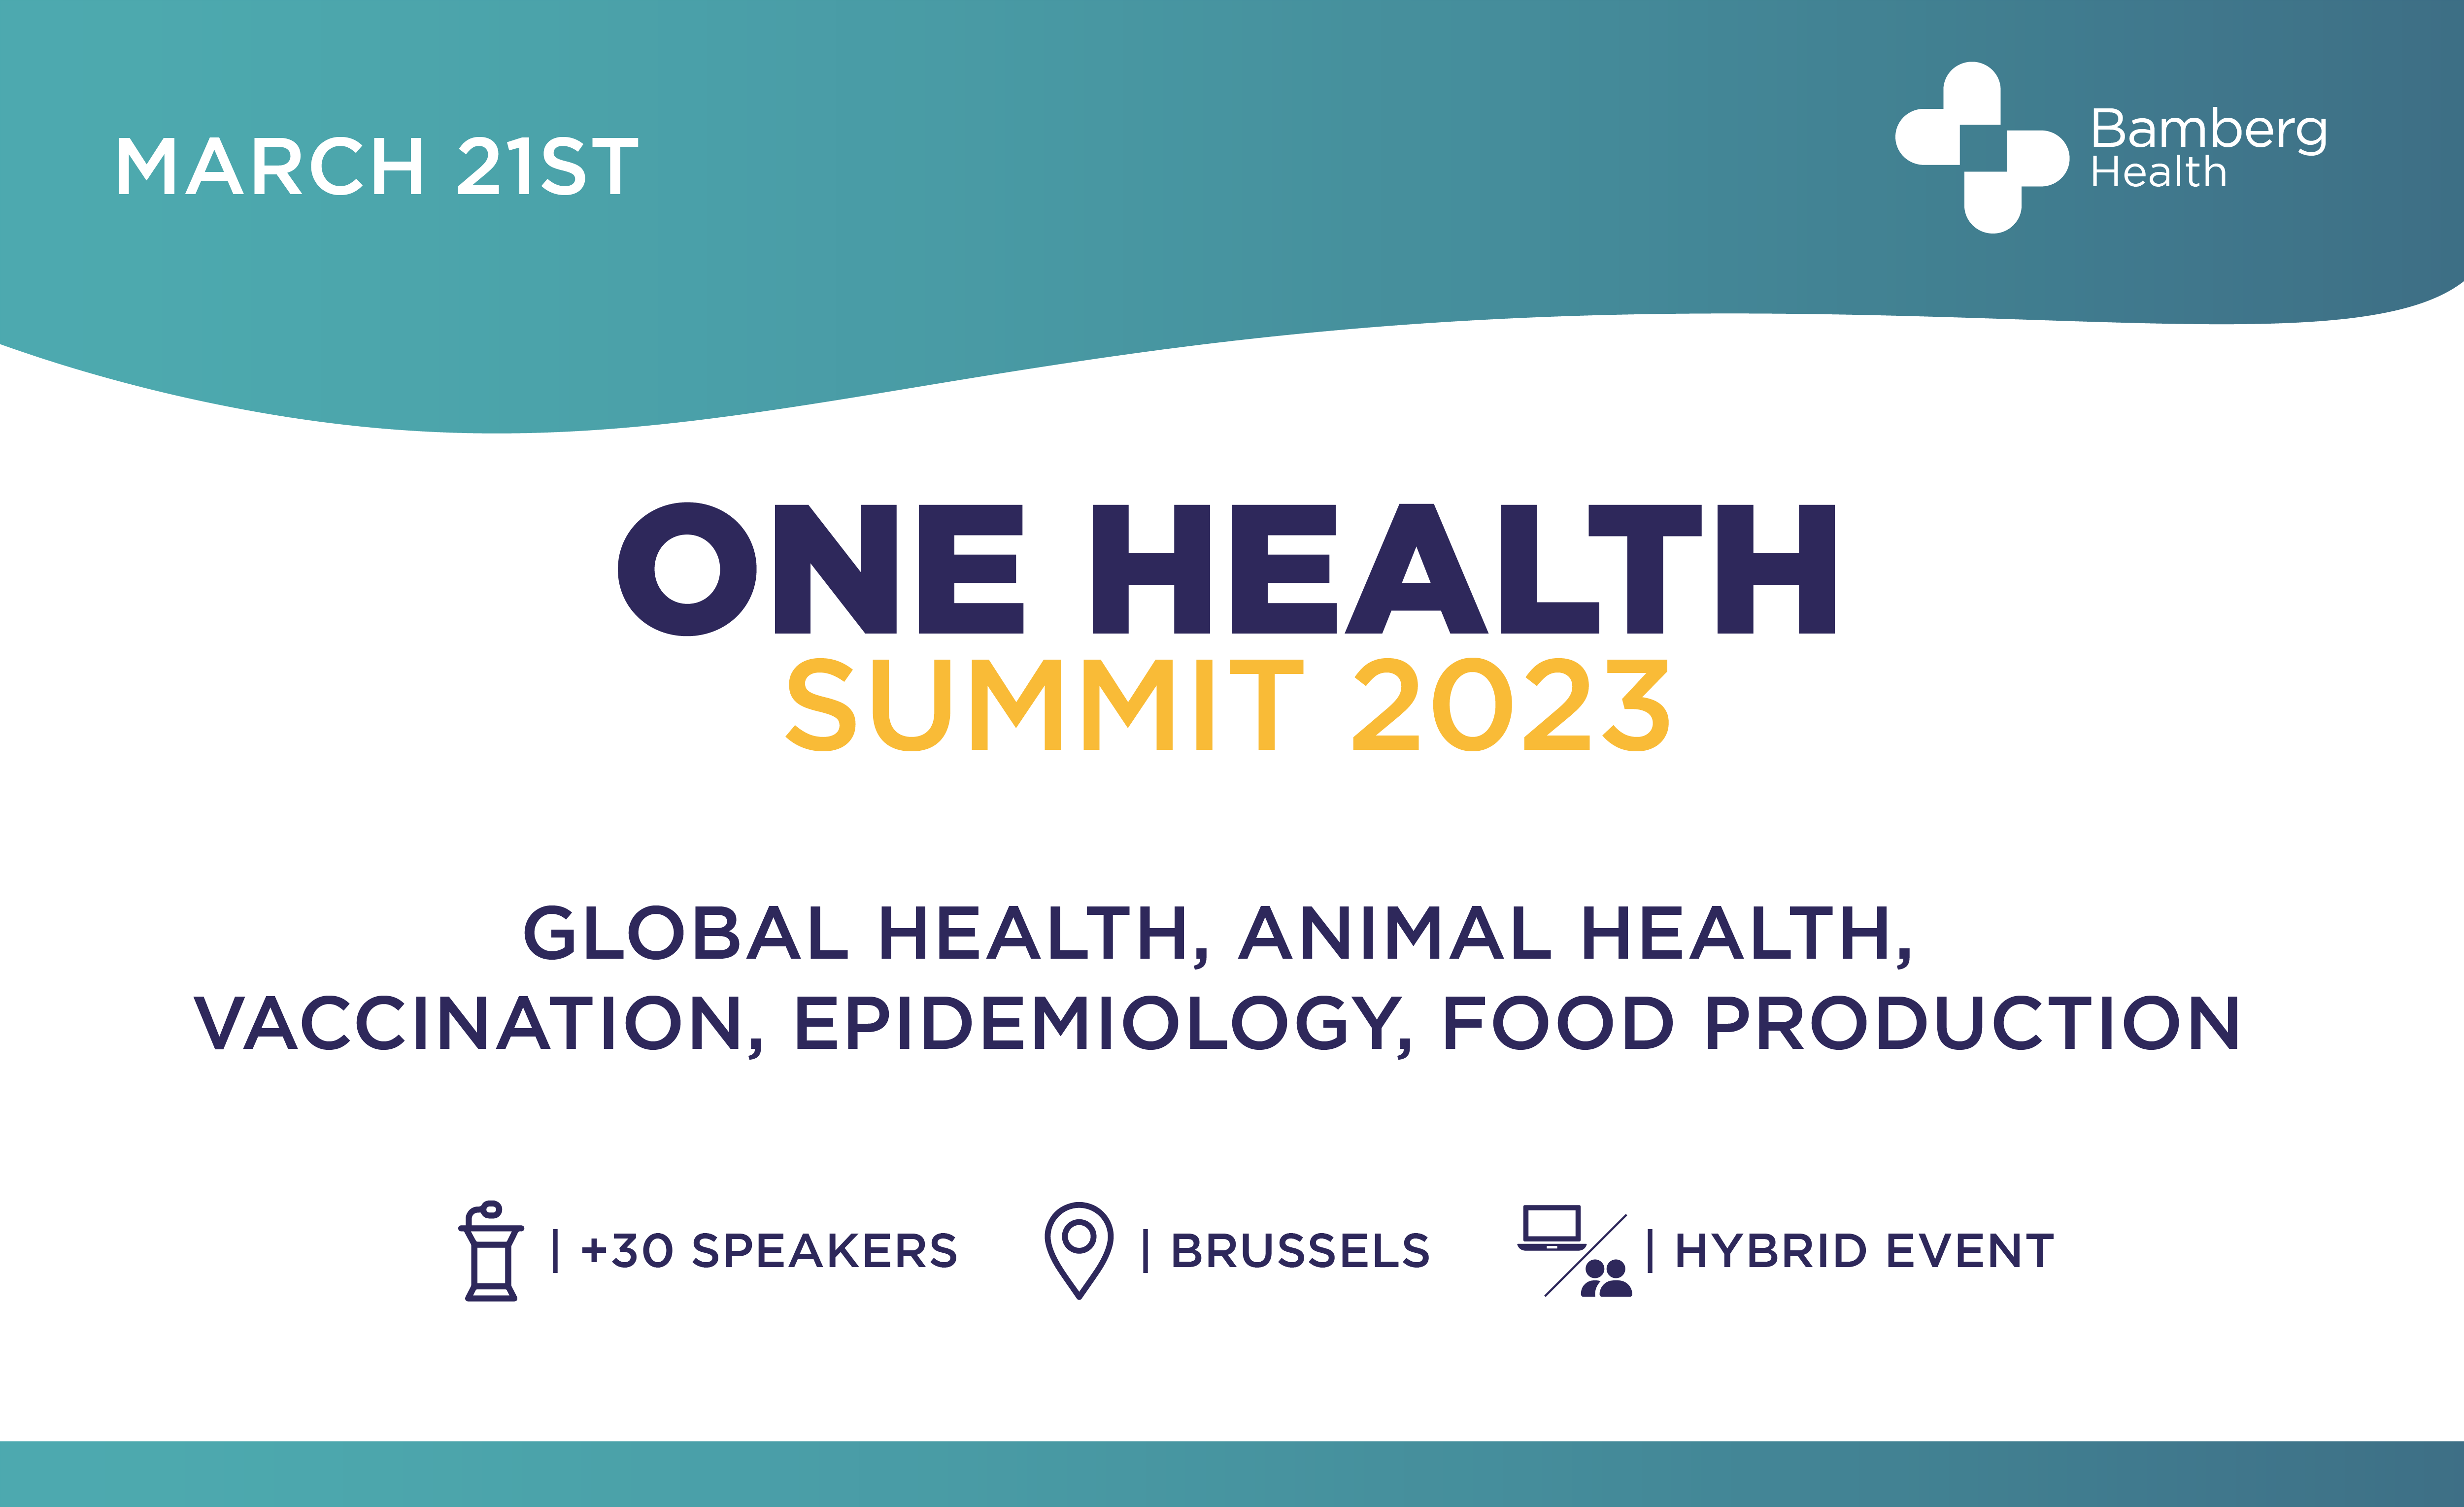 Prevention and Control of Zoonoses at the One Health Summit 